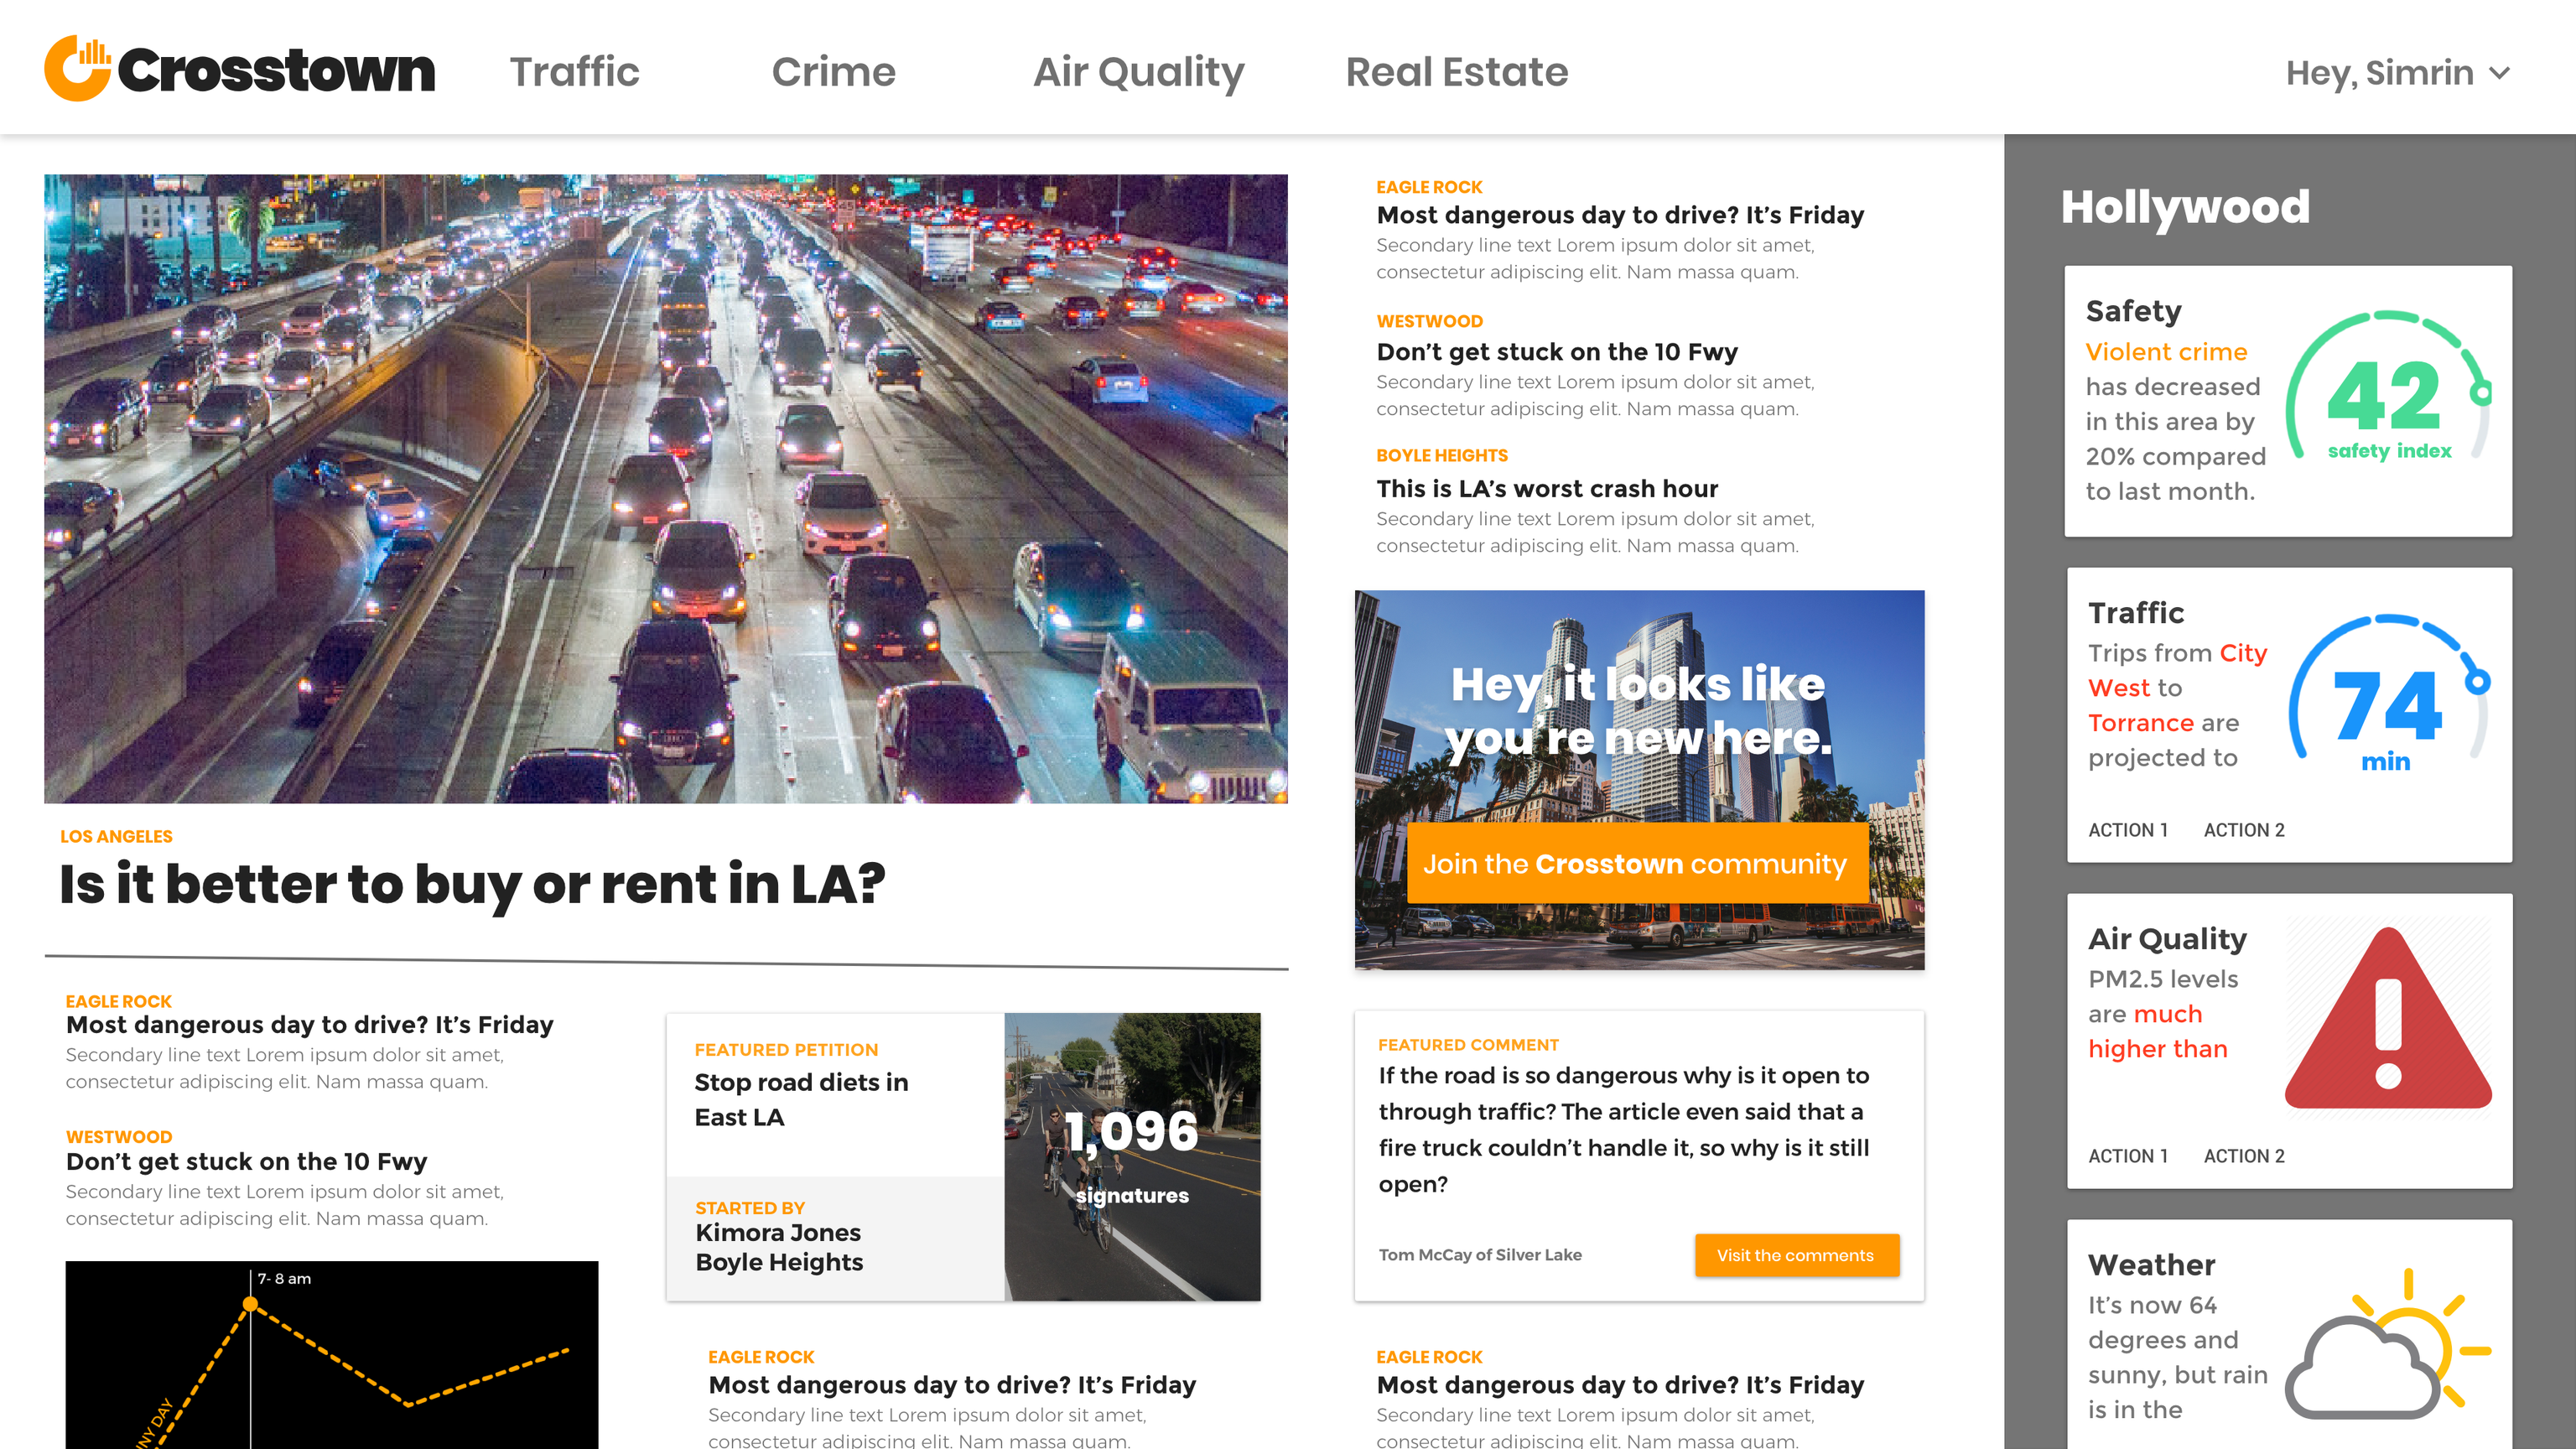 A mockup of the Crosstown homepage, showing several news stories and a column of neighborhood-specific information.